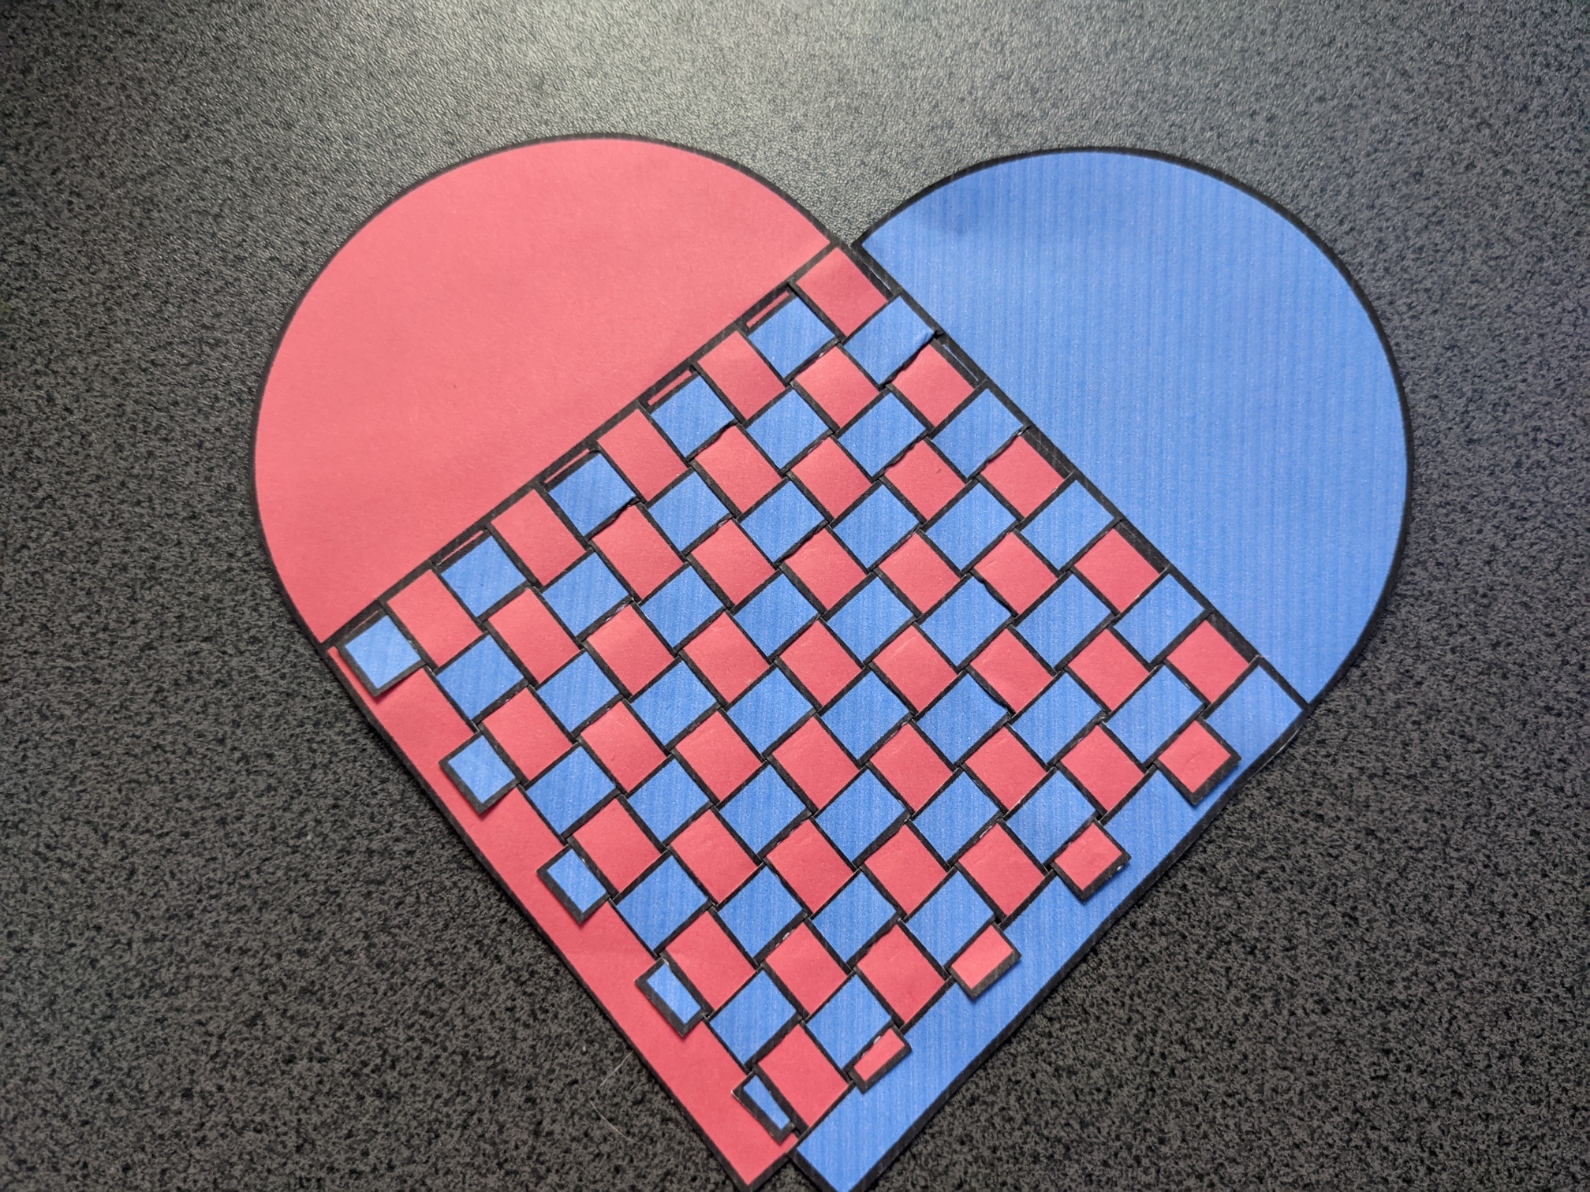 a completed woven heart design